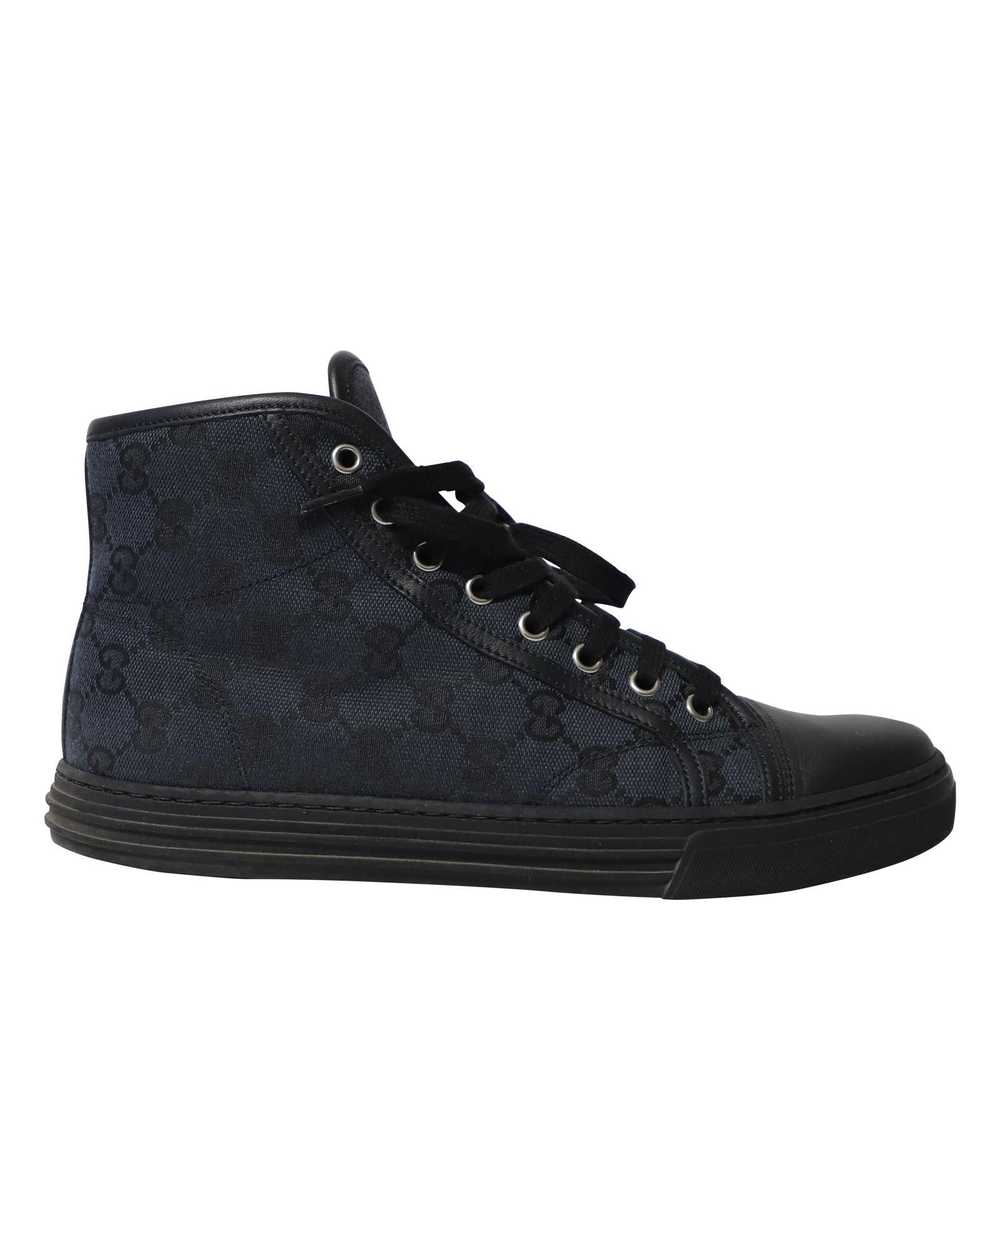 Gucci GG High Cut Sneakers in Navy Blue Canvas - image 1